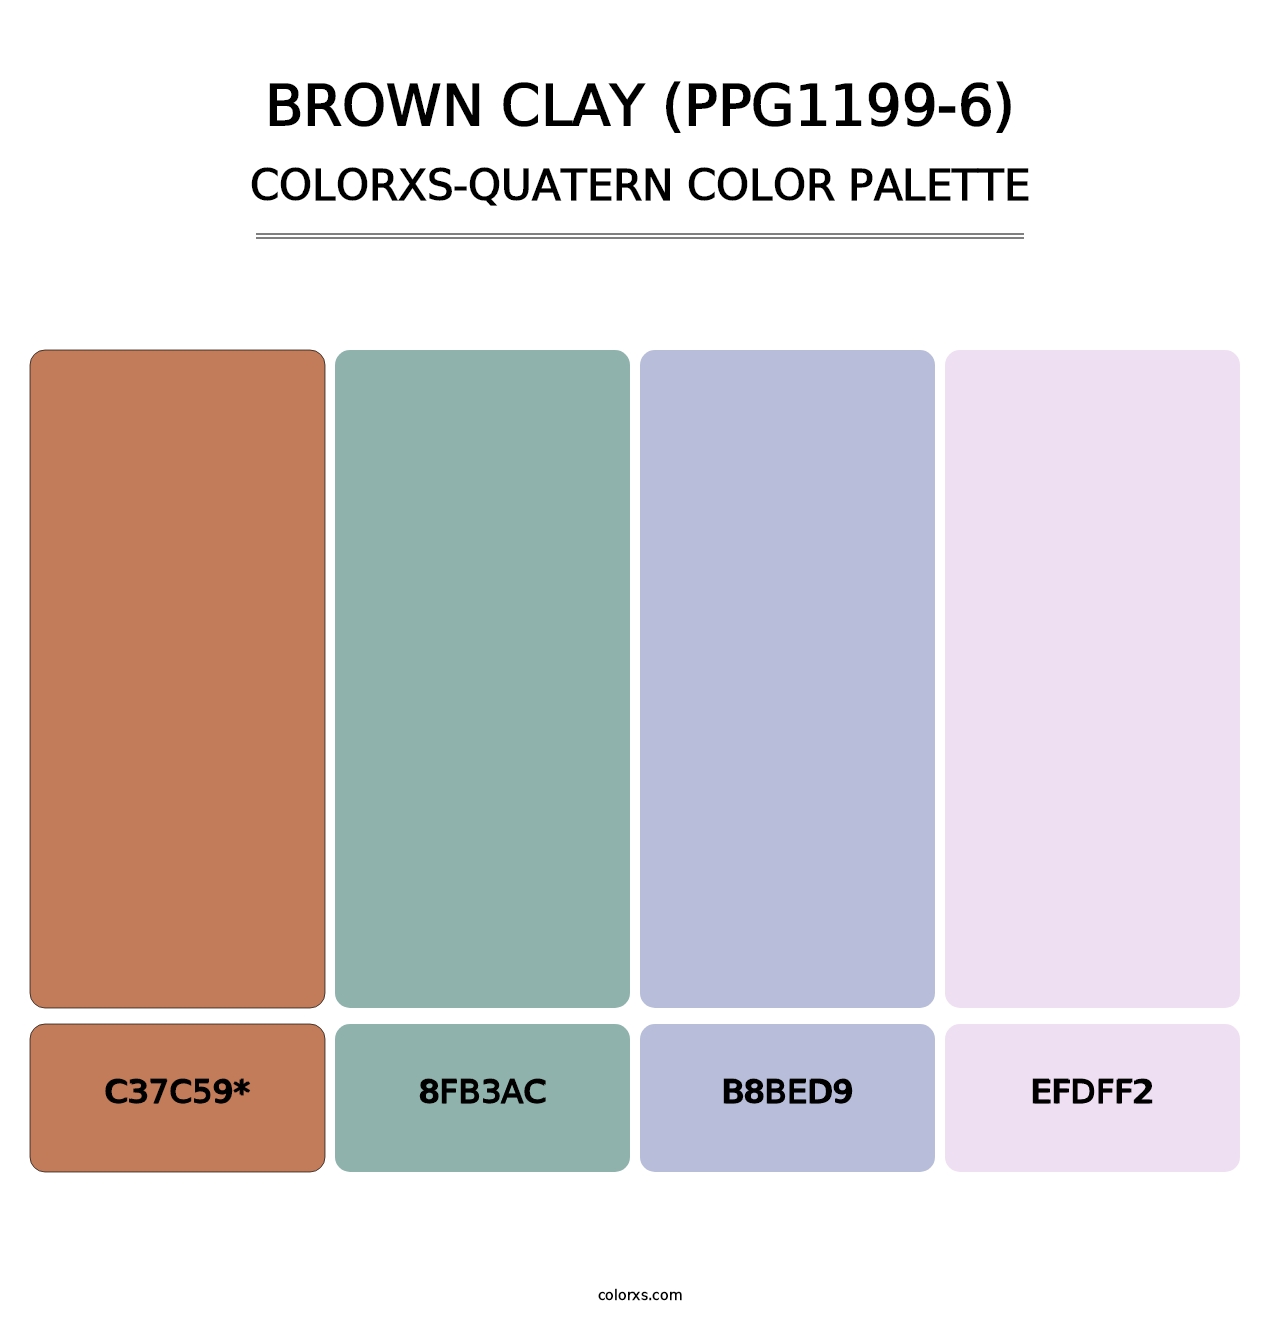 Brown Clay (PPG1199-6) - Colorxs Quatern Palette